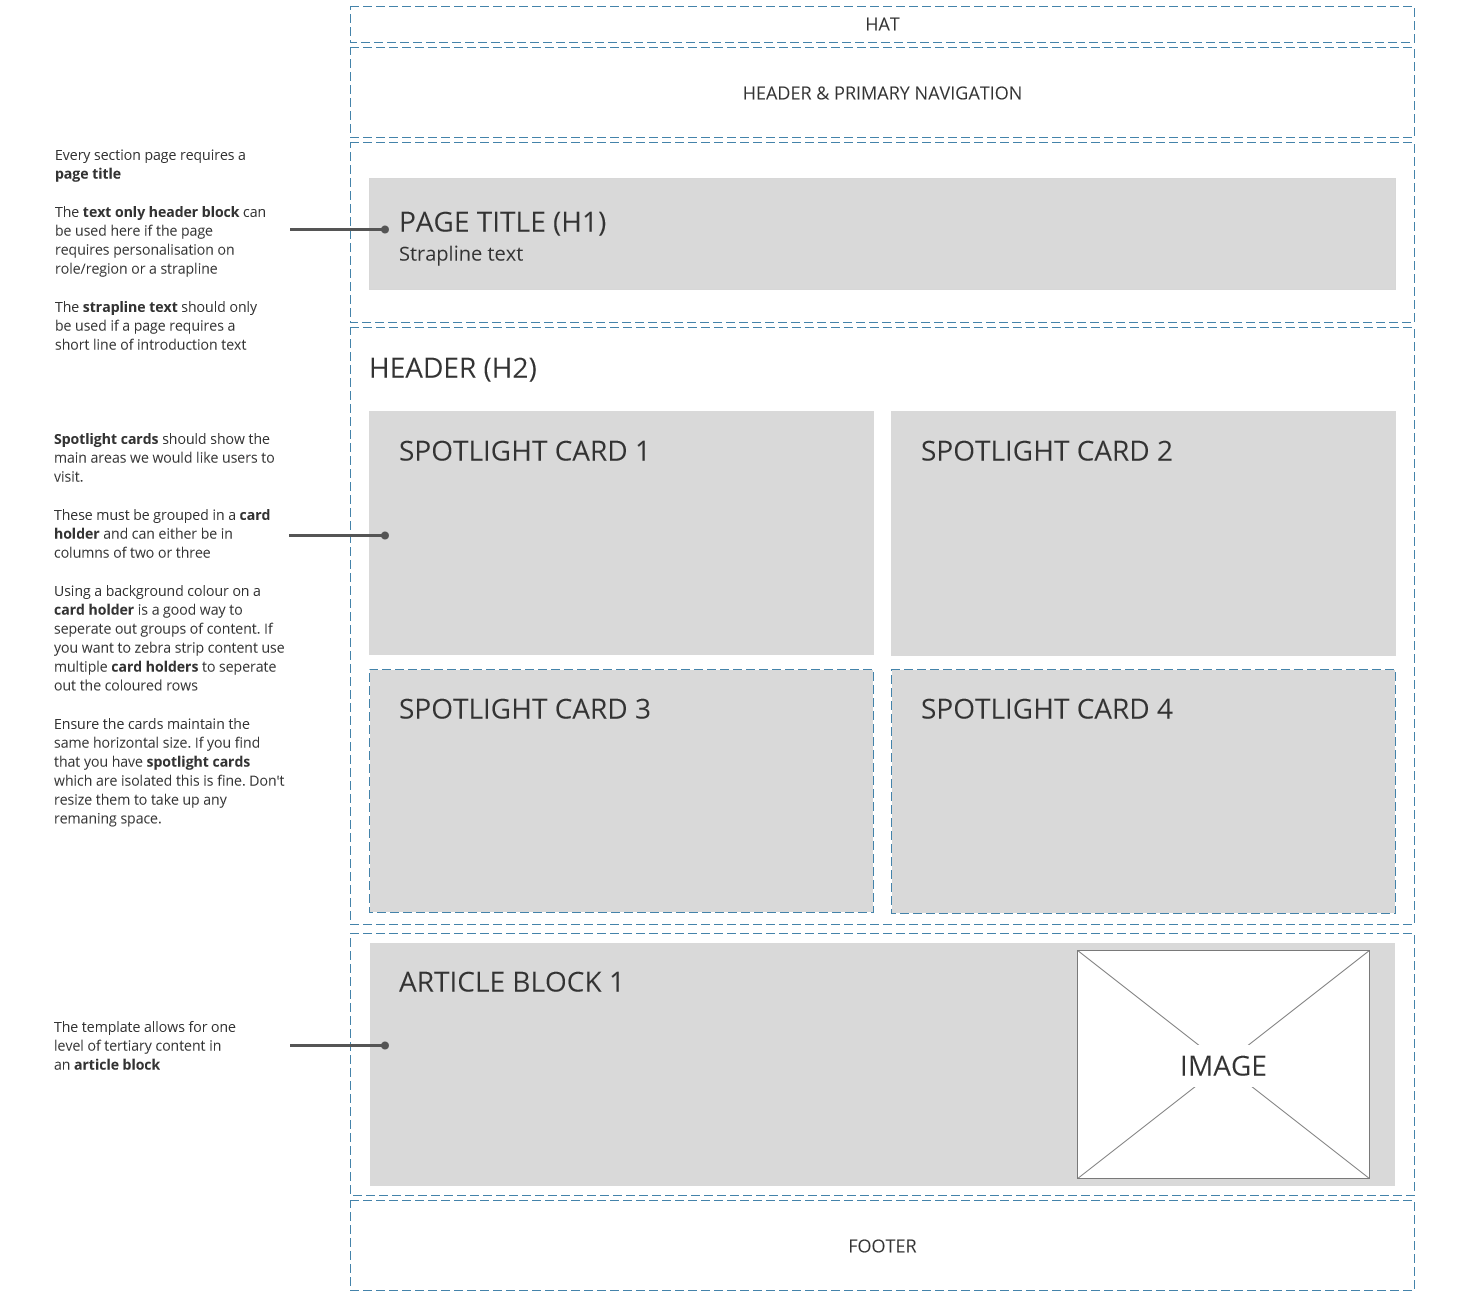 Template for section page